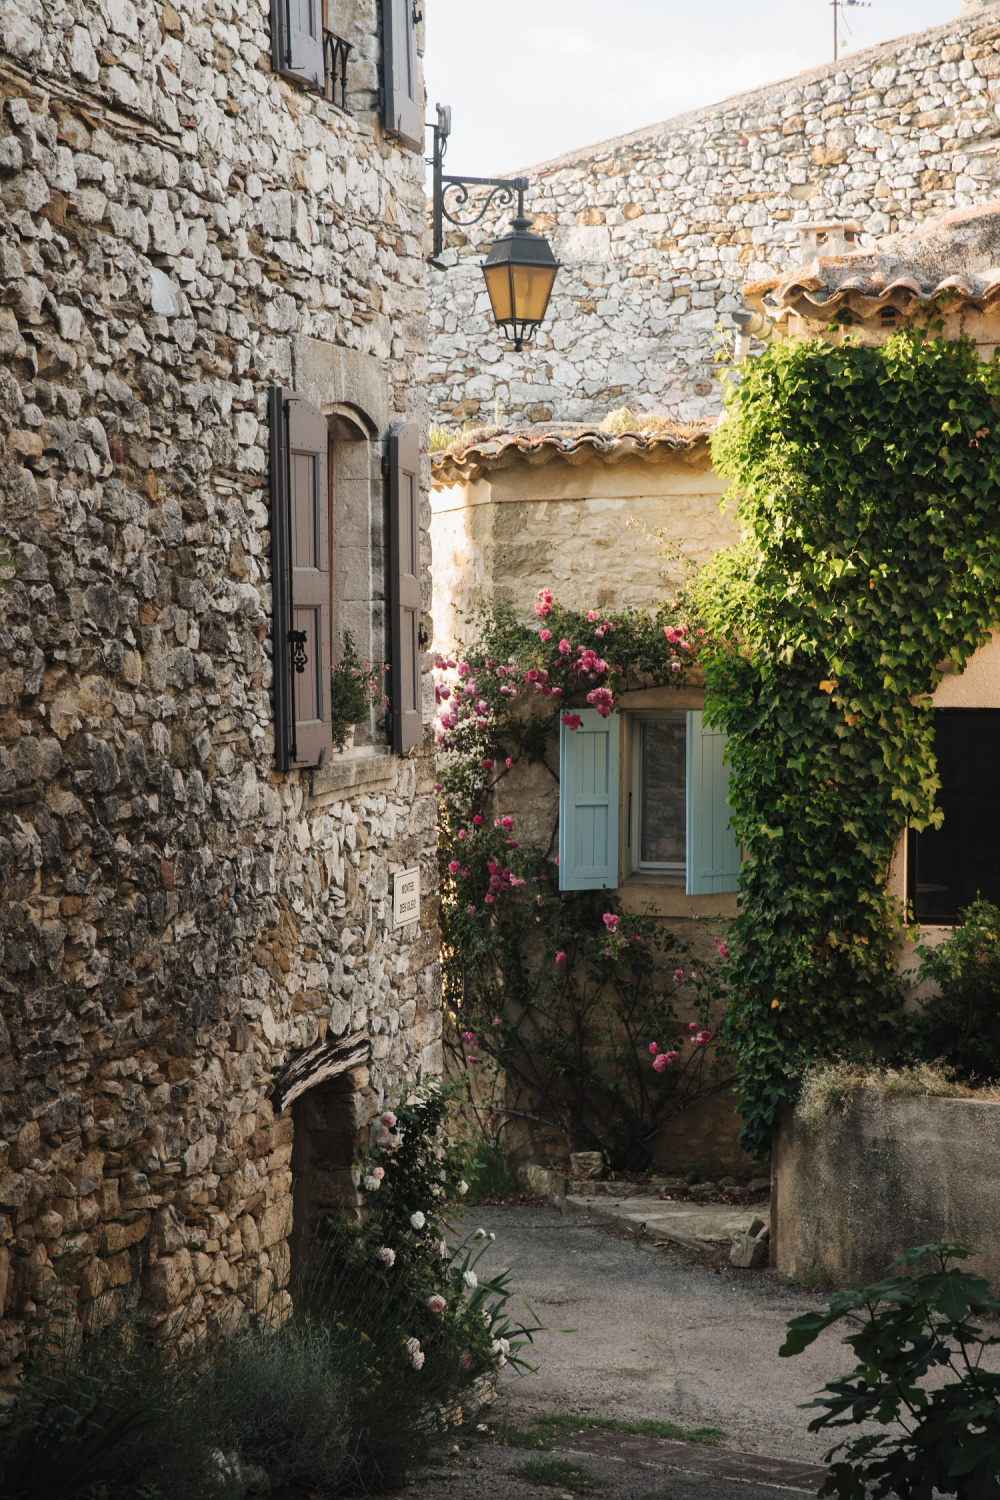 A romantic country French exterior from Provence in THE FLOWERS OF PROVENCE by Jamie Beck. #provencestyle #flowersofprovence #jamiebeck